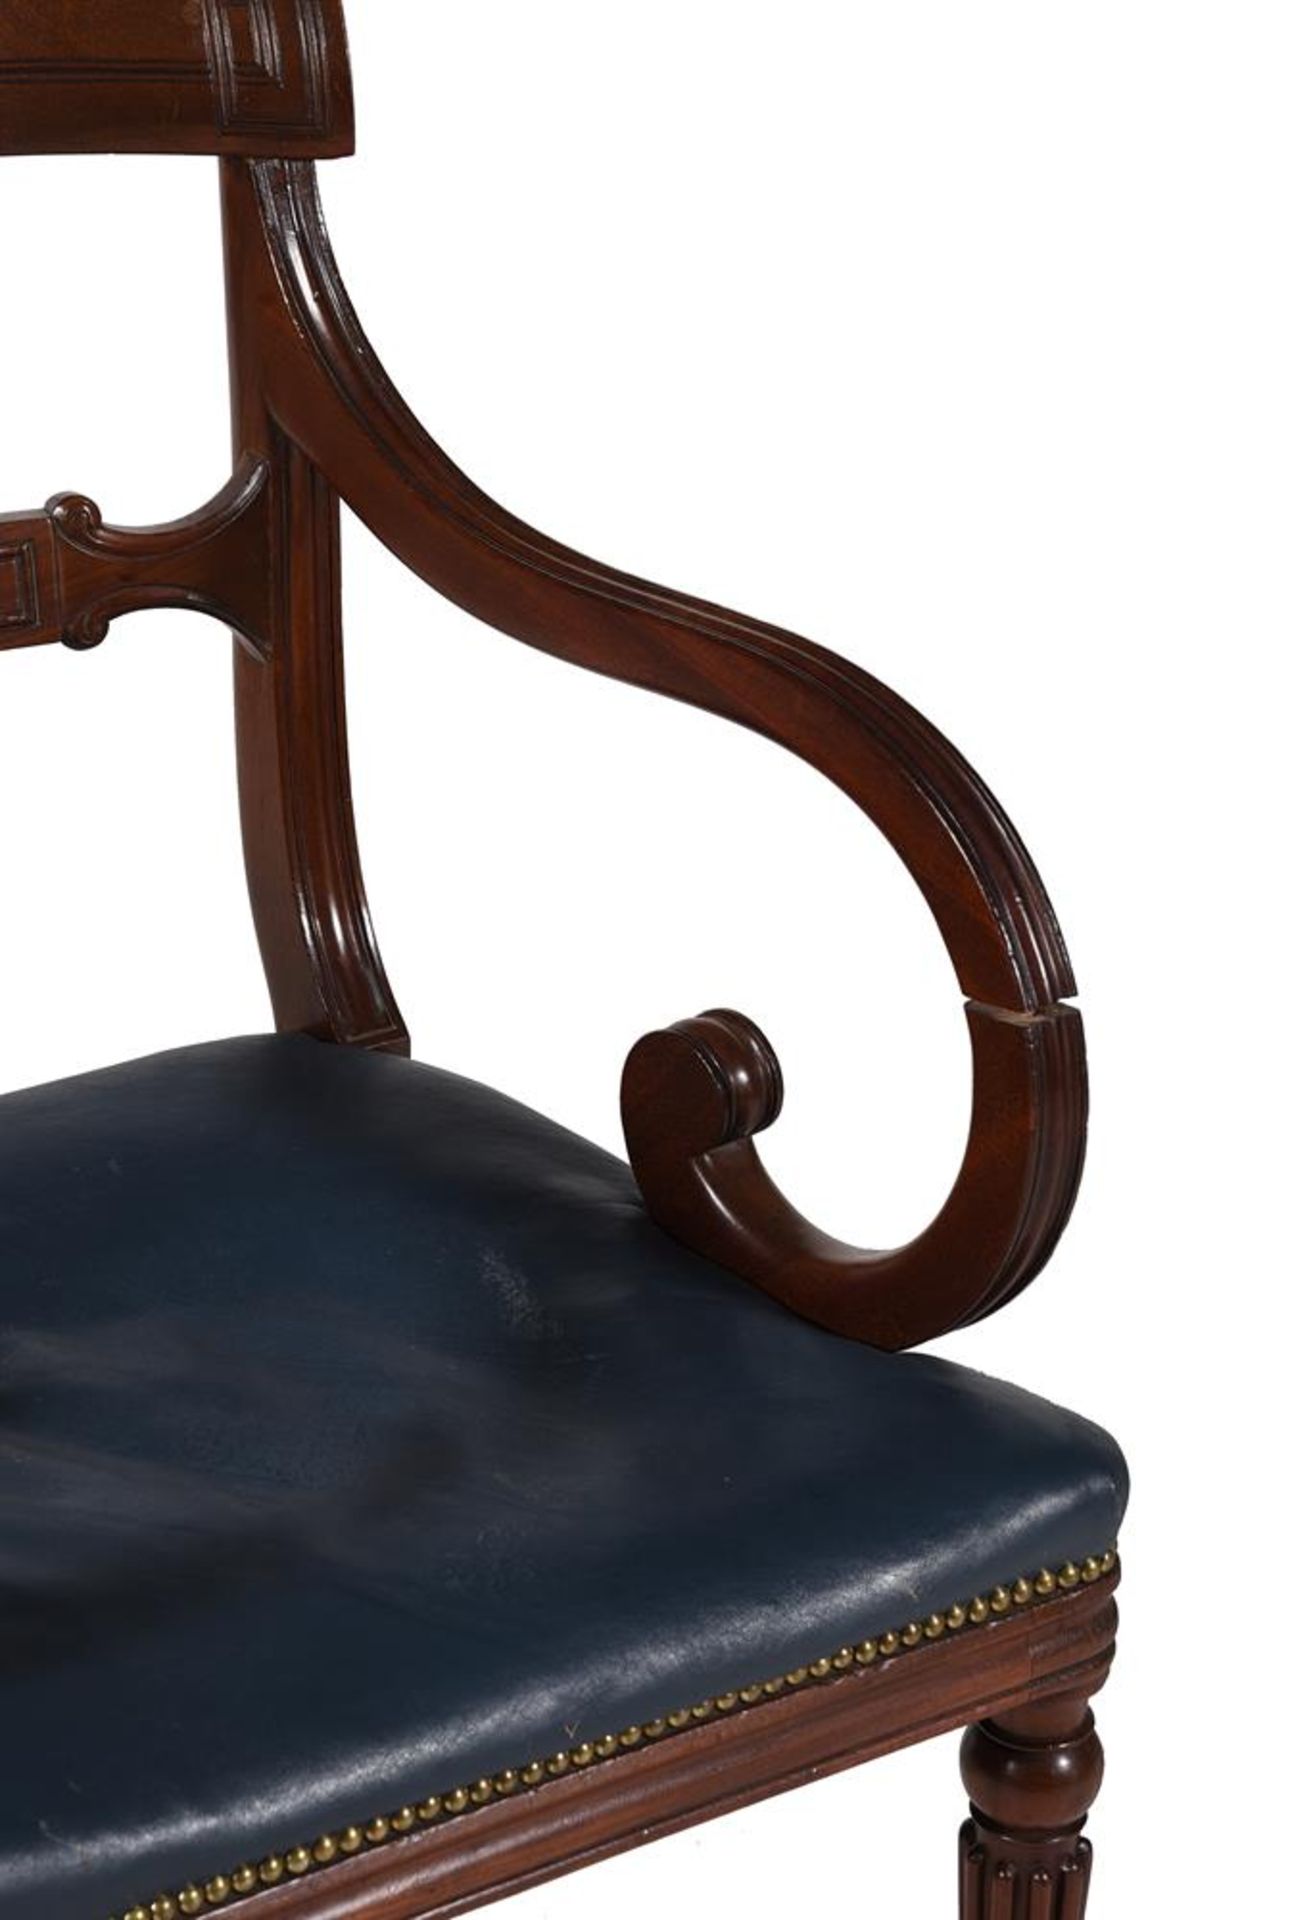 A SET OF TEN GEORGE IV MAHOGANY DINING CHAIRS, ATTRIBUTED TO GILLOWS, CIRCA 1825 - Image 5 of 8